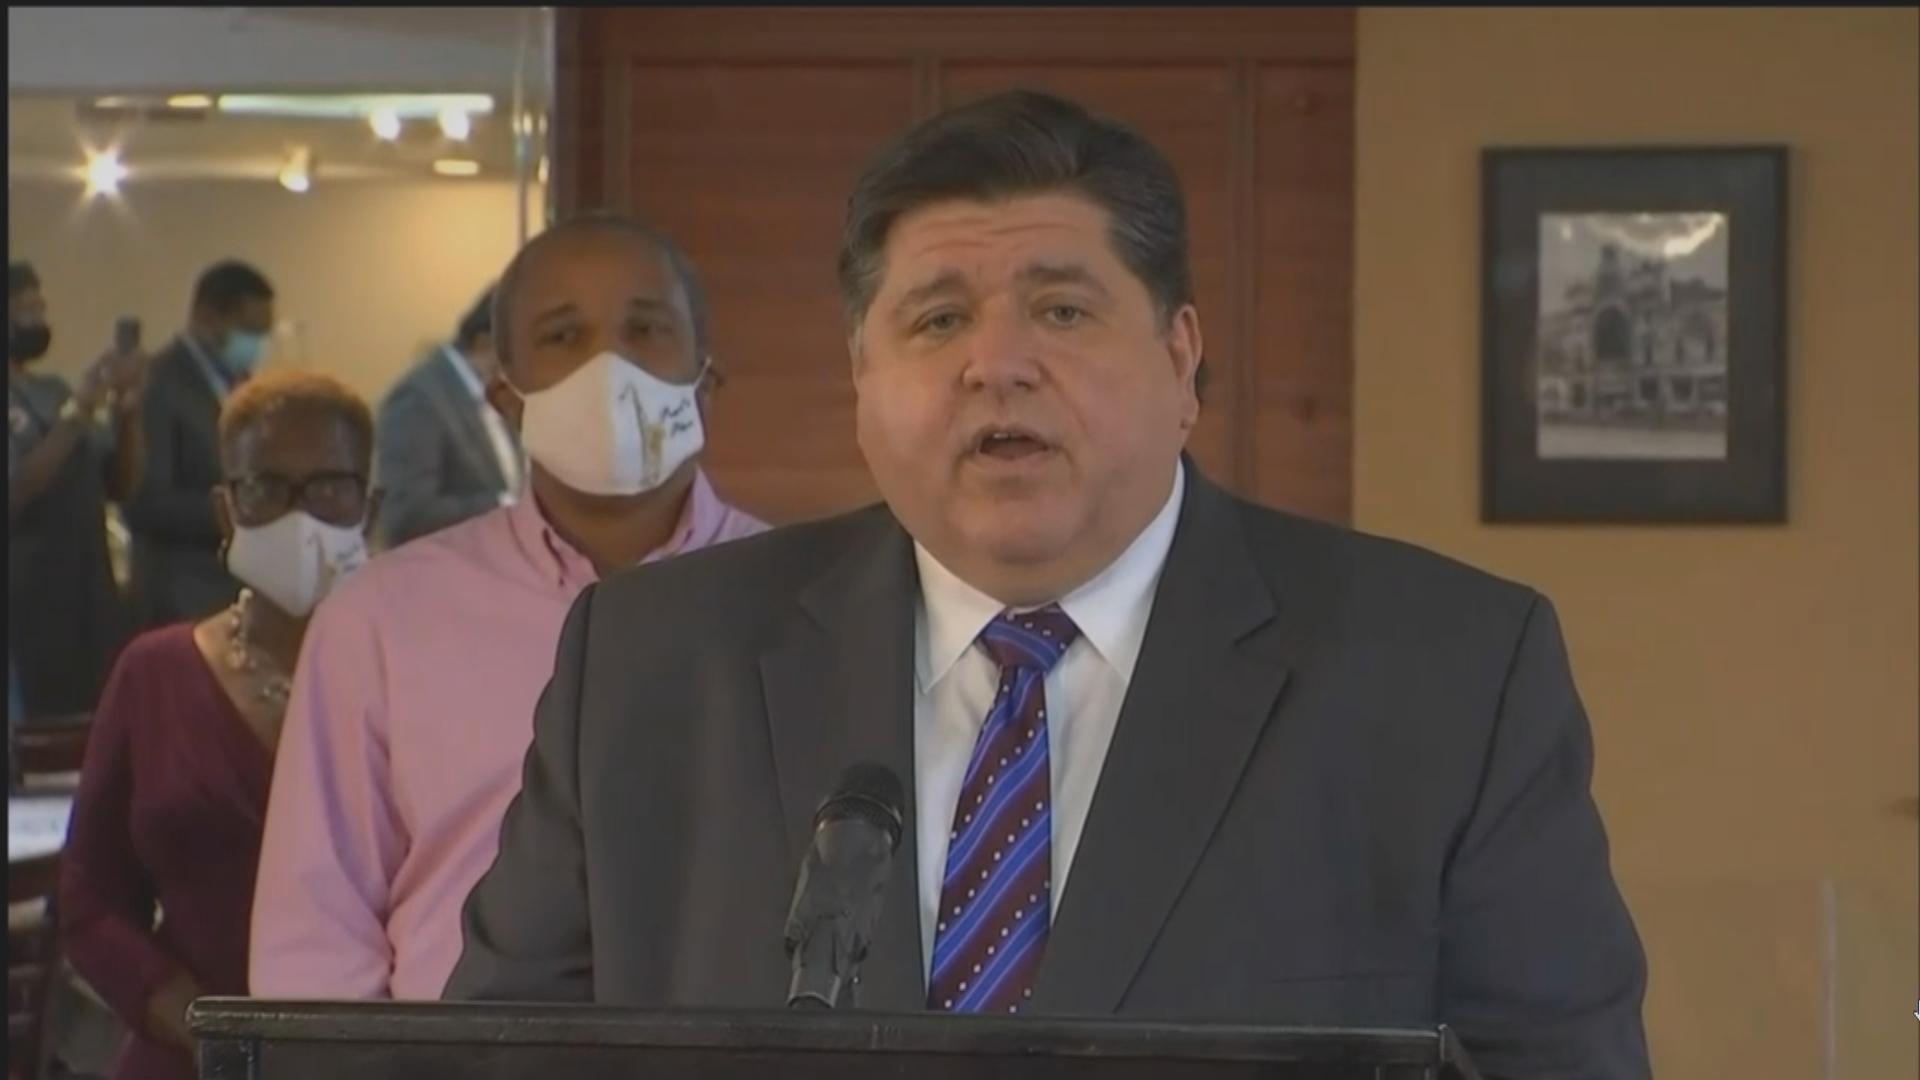 Gov. J.B. Pritzker talks about the need for the federal government to provide relief to state and local governments impacted by the coronavirus pandemic on Tuesday, Sept. 15, 2020. (WTTW News)